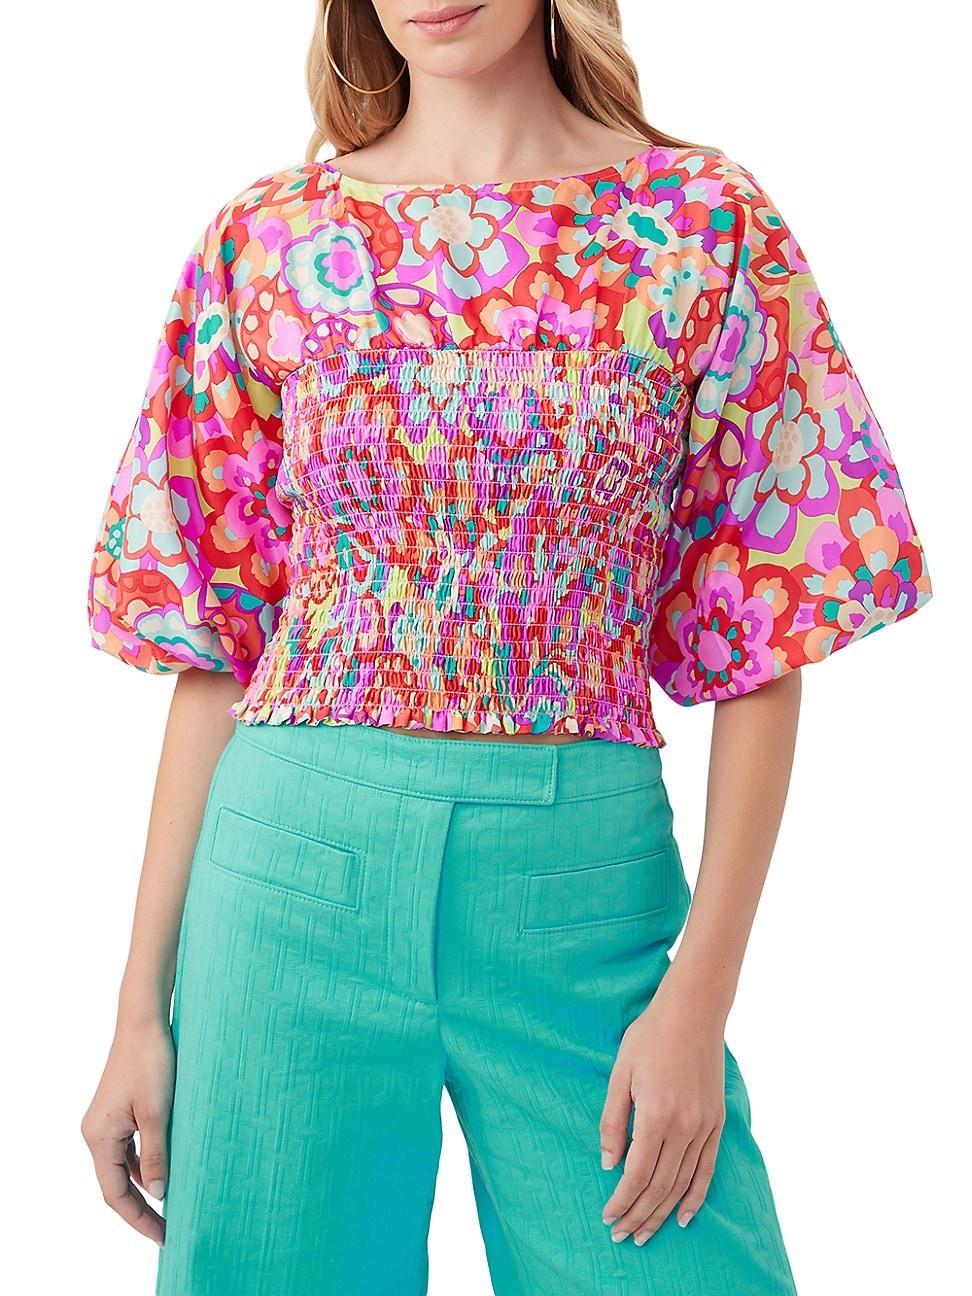 Womens Sumi Floral Smocked Top Product Image